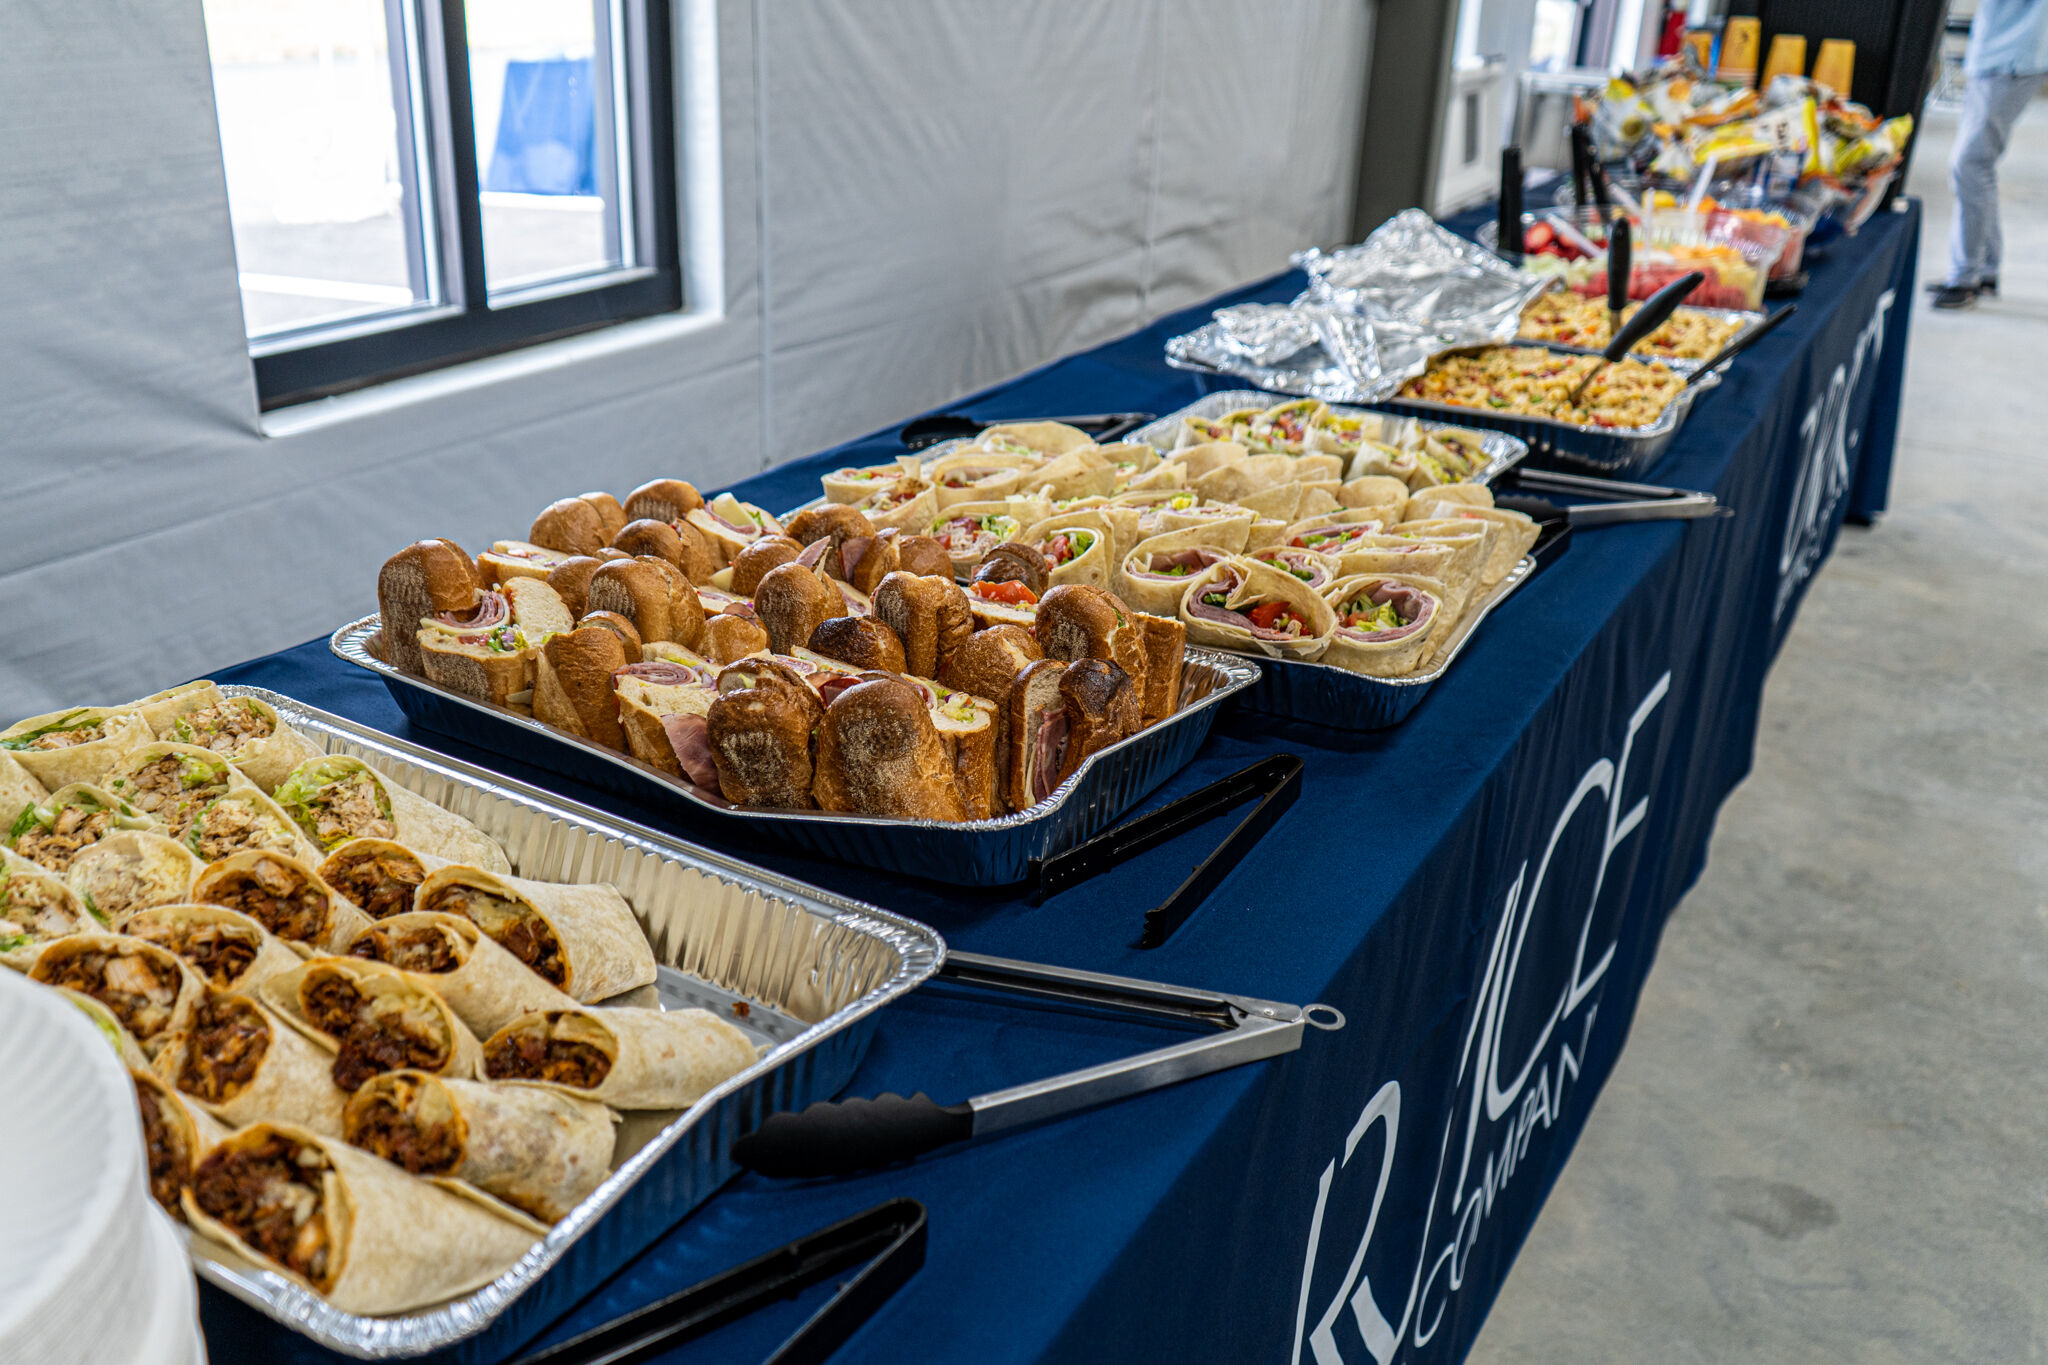 The catered lunch at the event.